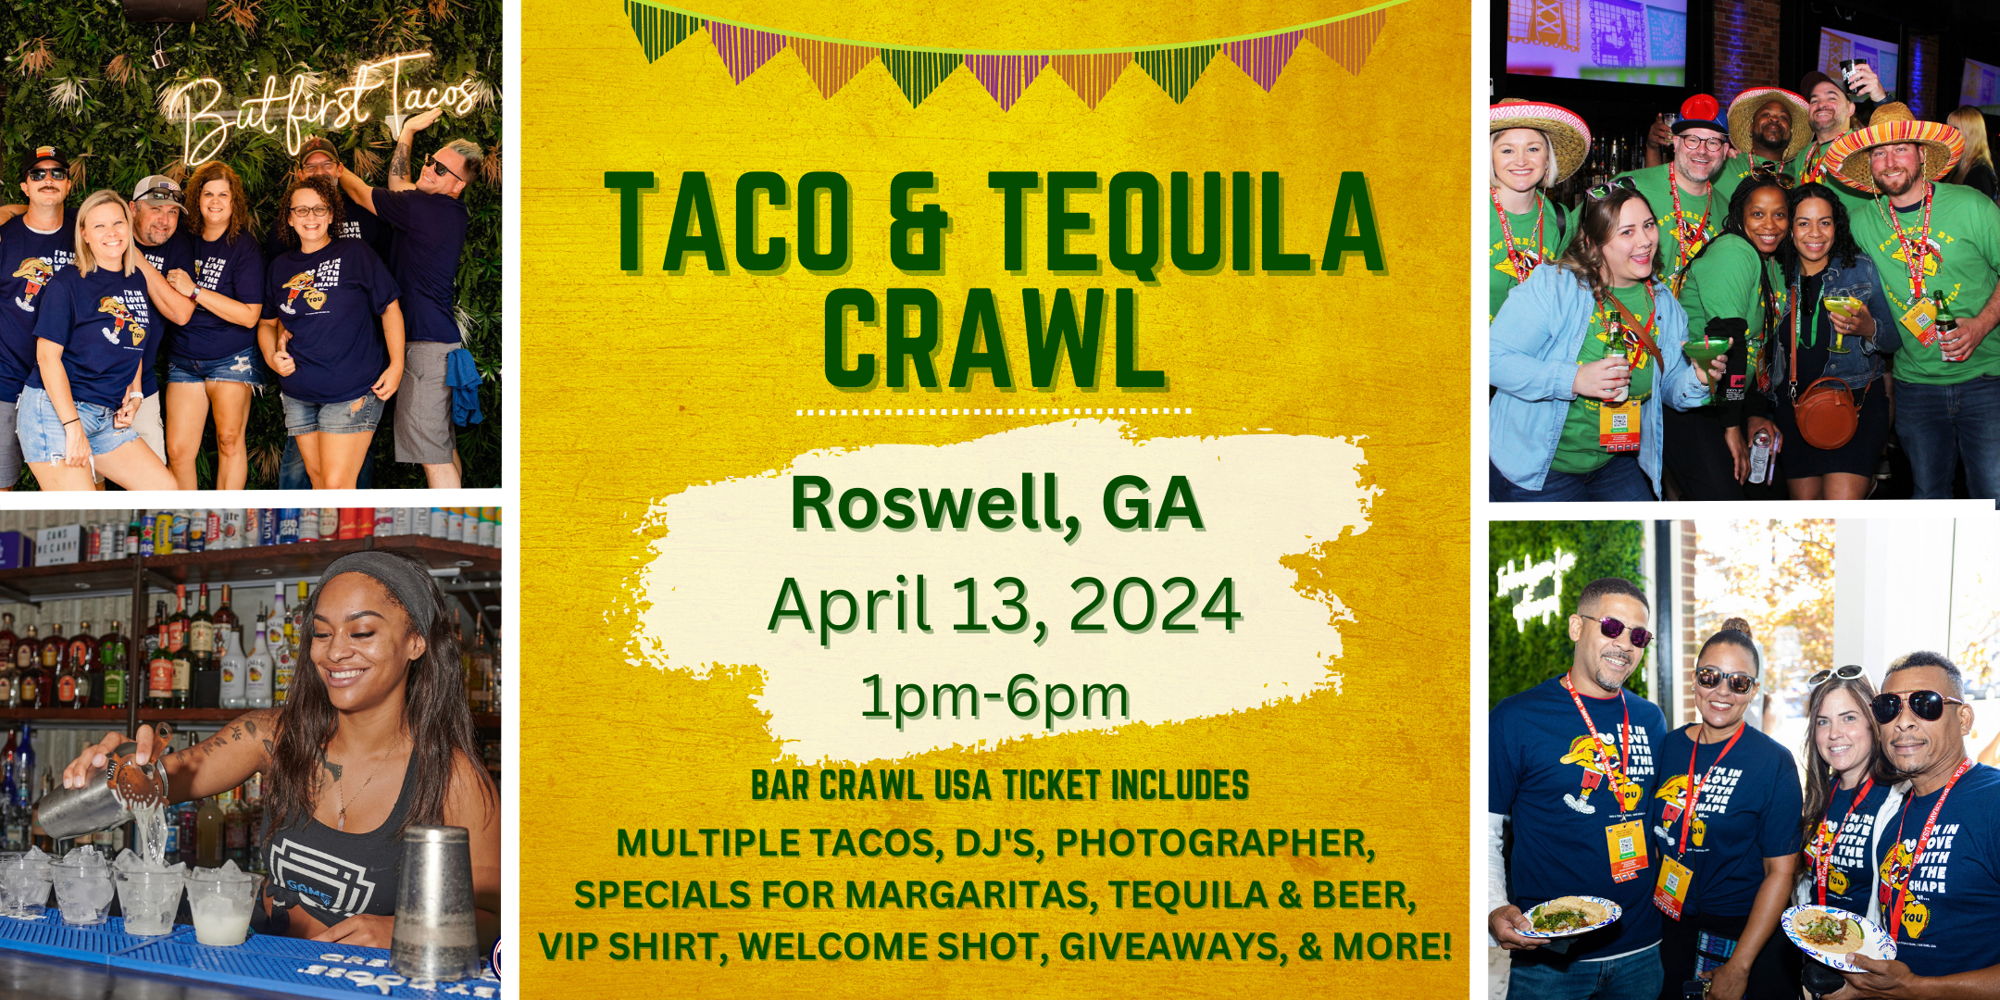 Roswell Taco & Tequila Bar Crawl promotional image